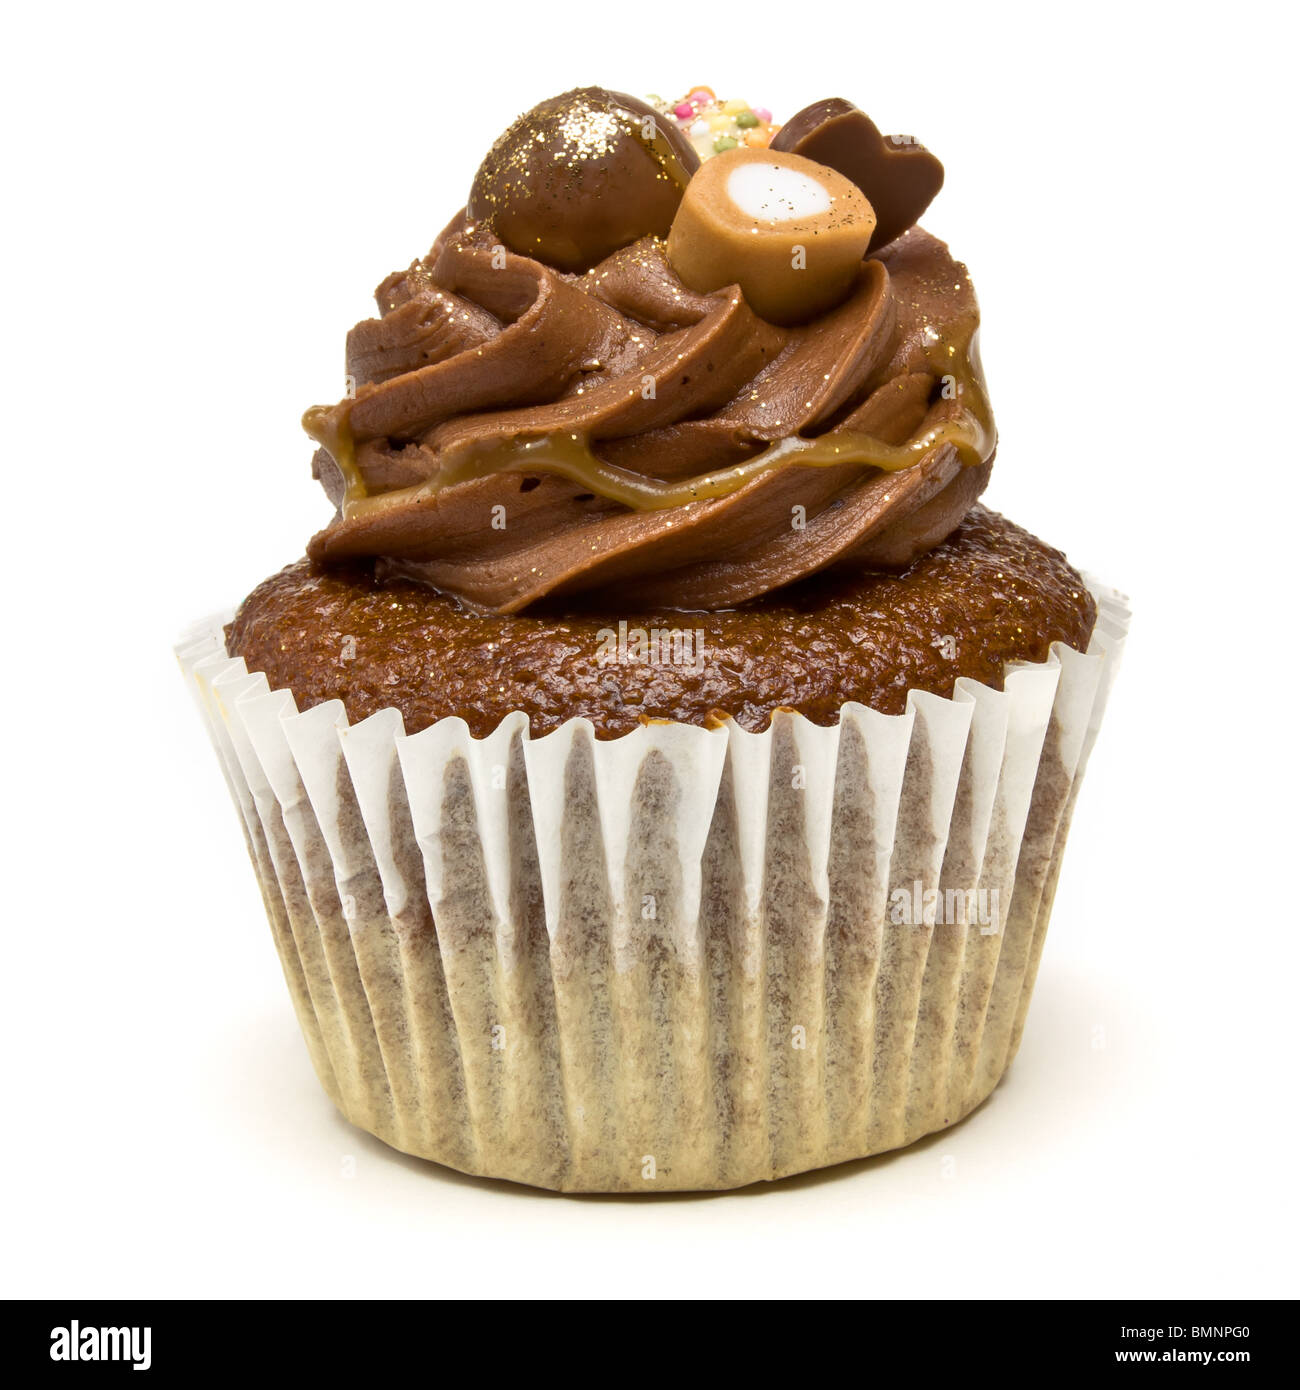 Luxury Chocolate Cup Cake from low perspective isolated against white background. Stock Photo